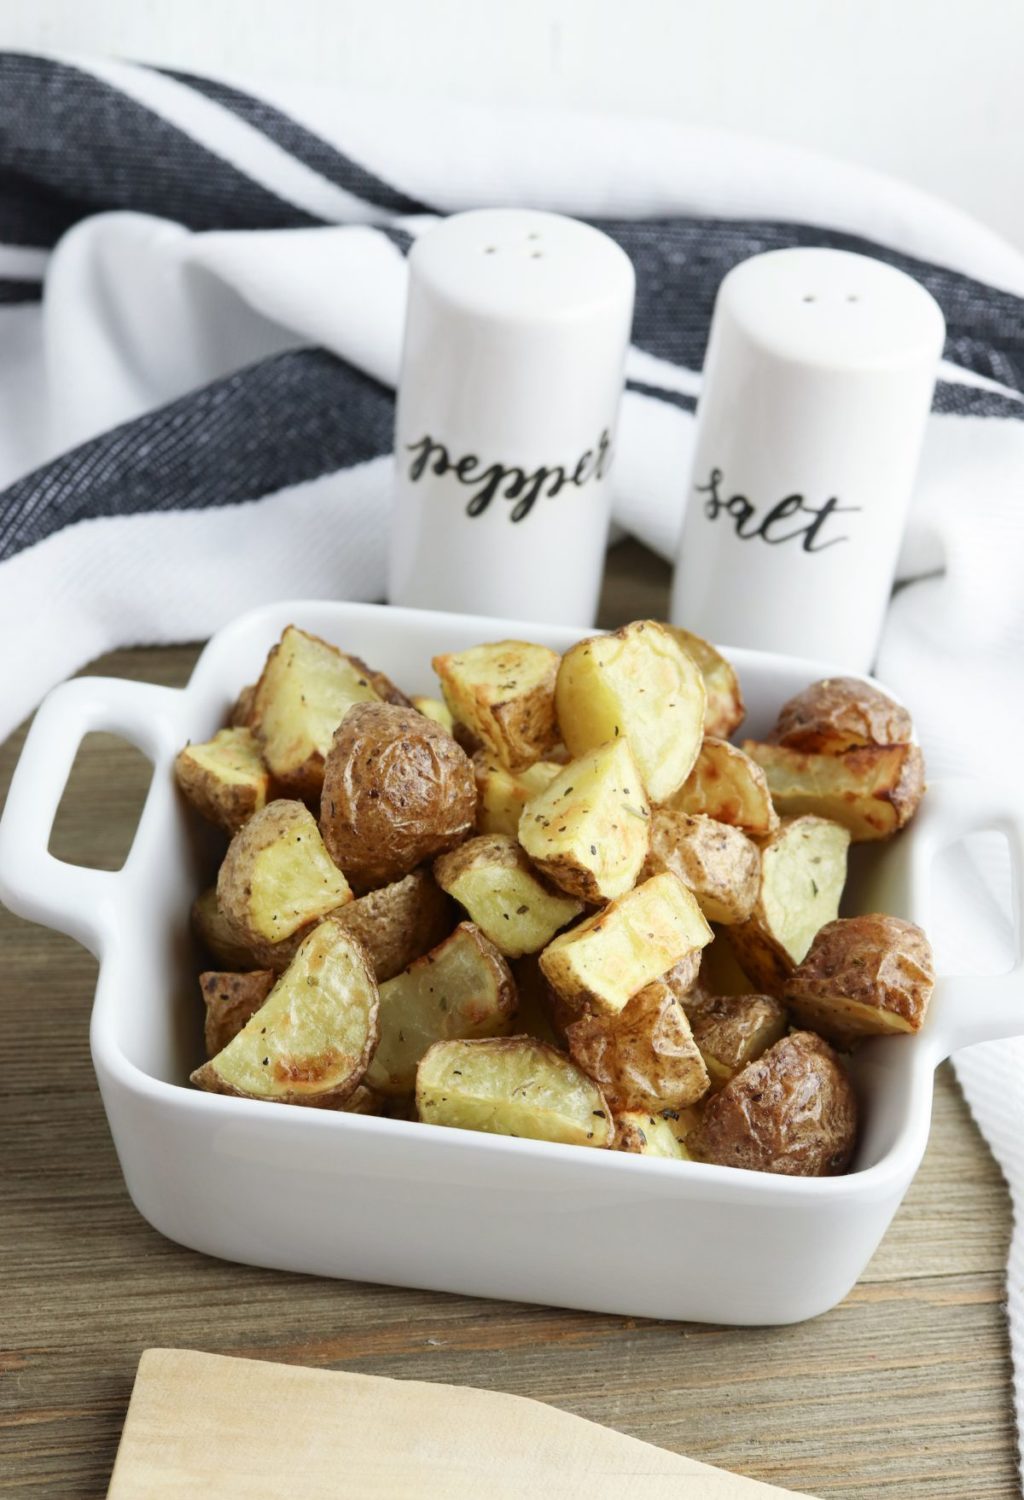 Roasted potatoes in a white dish with salt and pepper shakers.